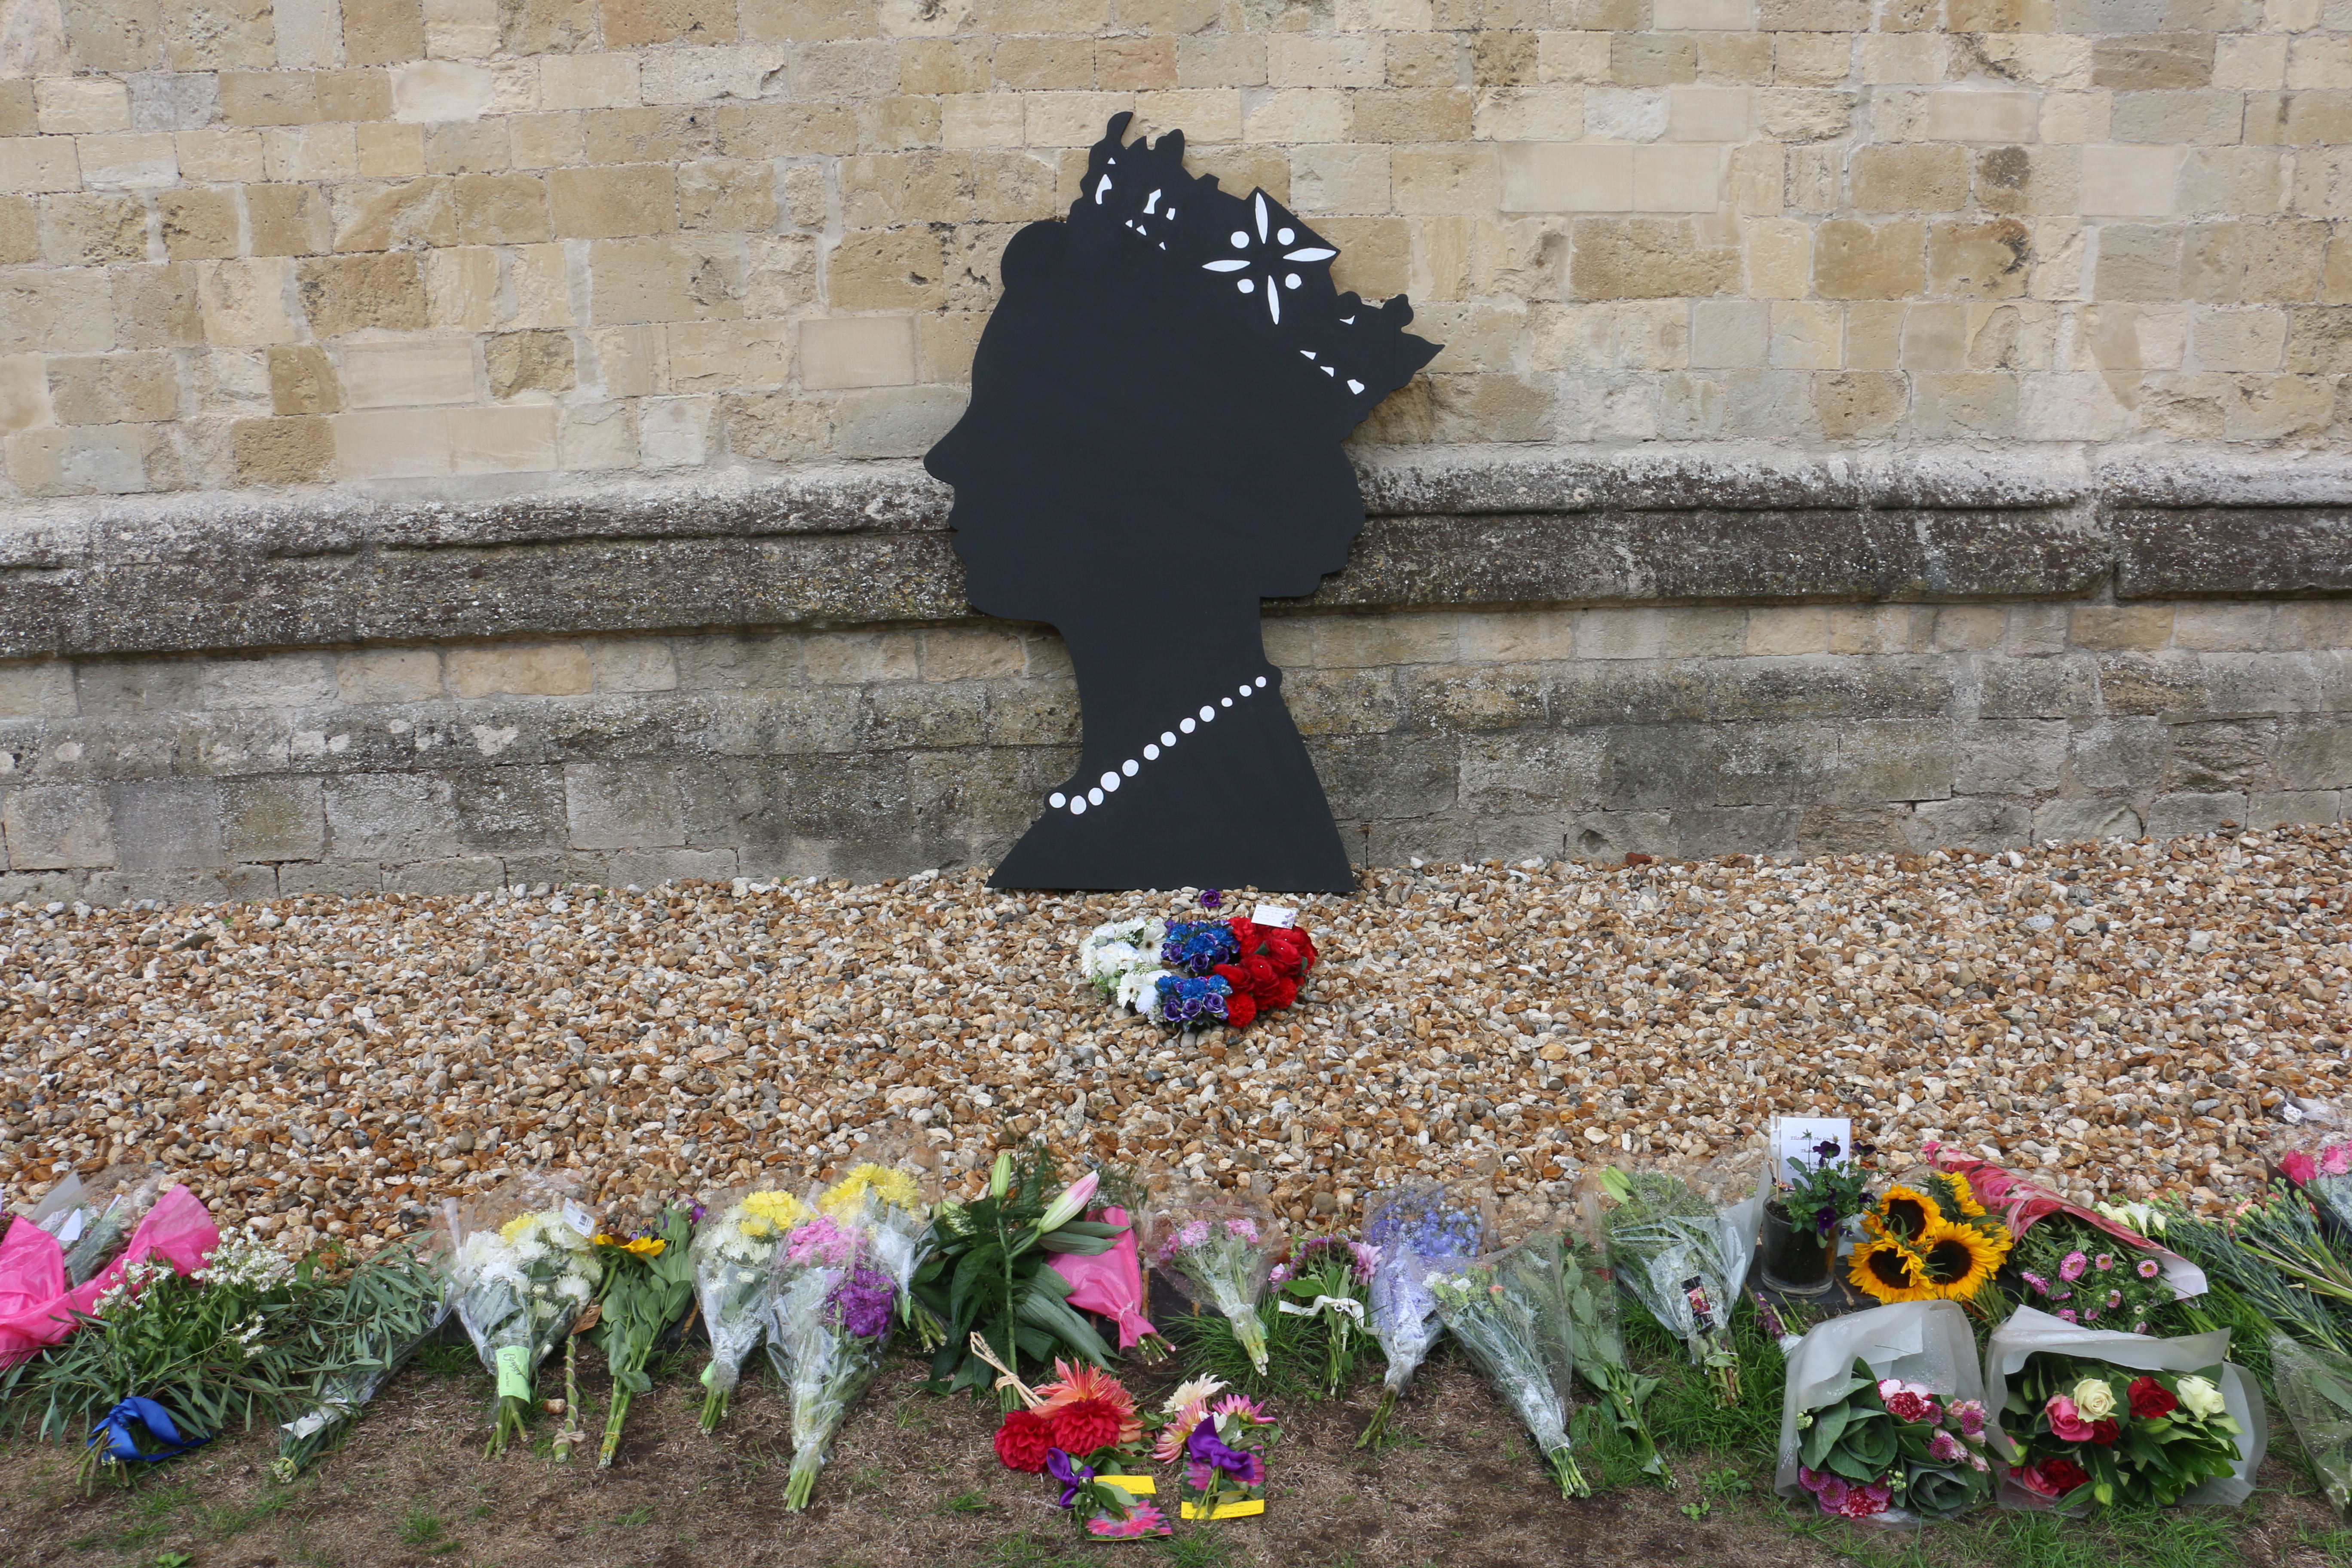 Her Late Majesty Queen Elizabeth II's silhouette in Paradise with flowers